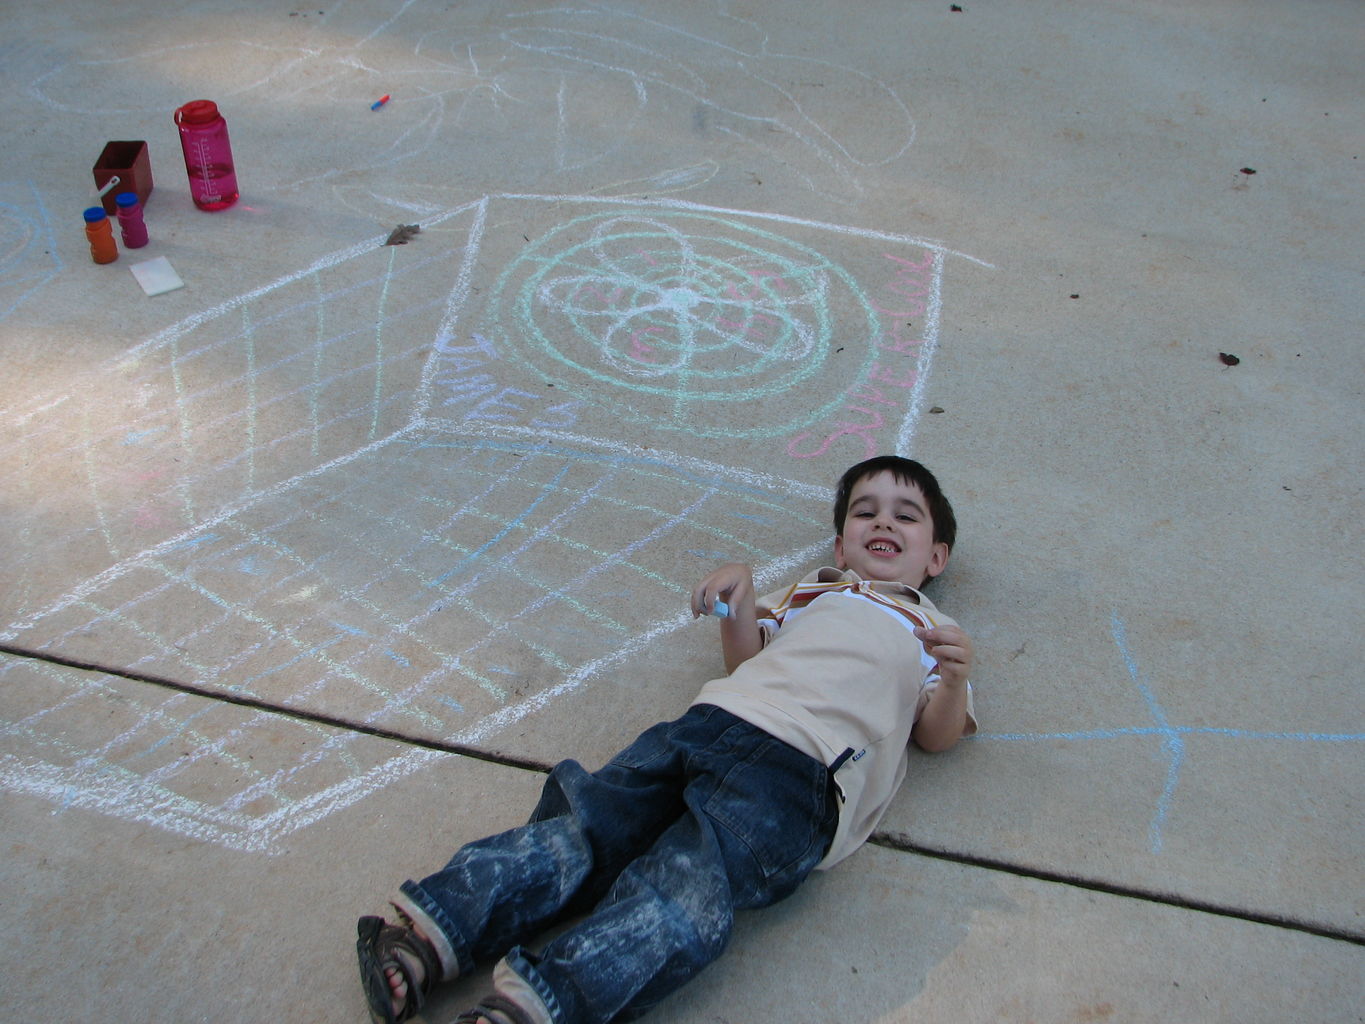 James and Mommy drawing Sidewalk Art
